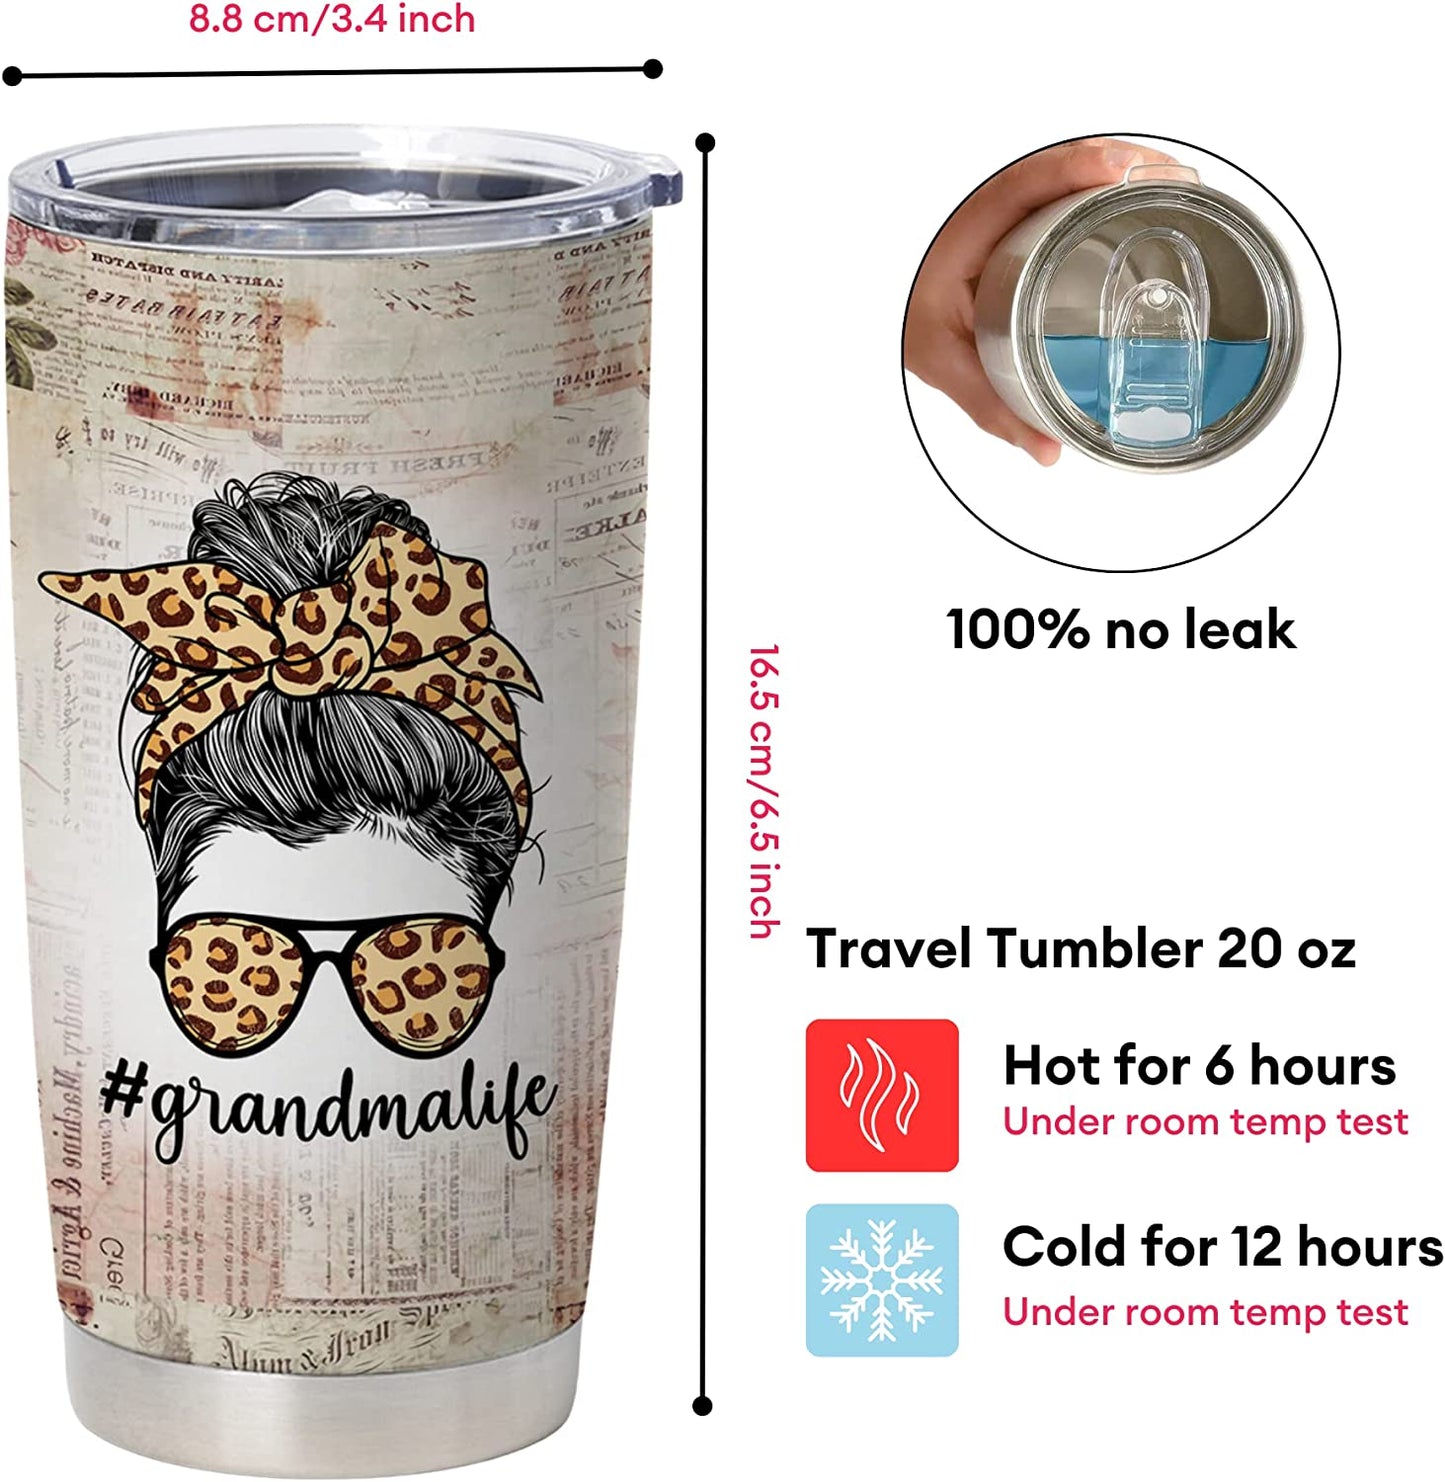 Grandma Gift Ideas, Grandma Birthday Gifts From grandchildren, Mother's Day Gifts For Nana, Gift Ideas For Grandmother, Grandma Travel Tumbler, Grandma Nutritionfact Travel Coffee Mugs 20 Oz